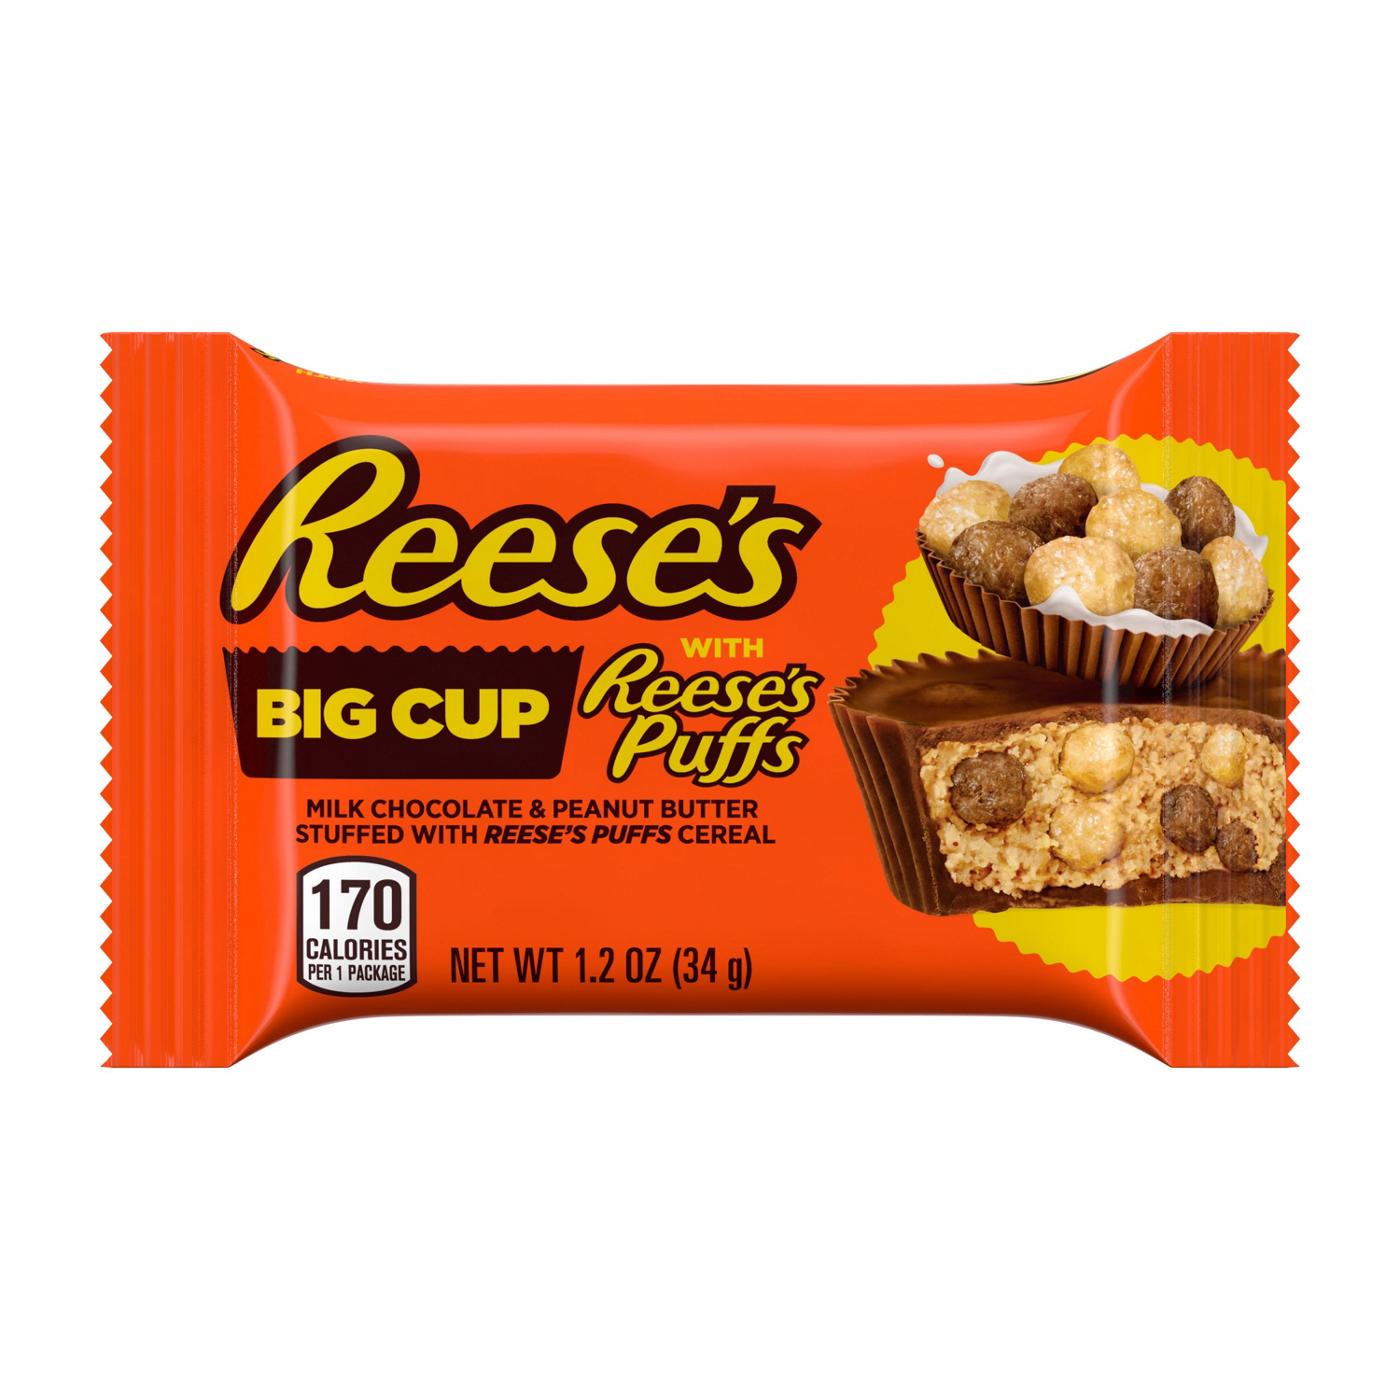 Reese's Big Cup Milk Chocolate & Peanut Butter Stuffed with Reese's Puffs Cereal; image 1 of 2